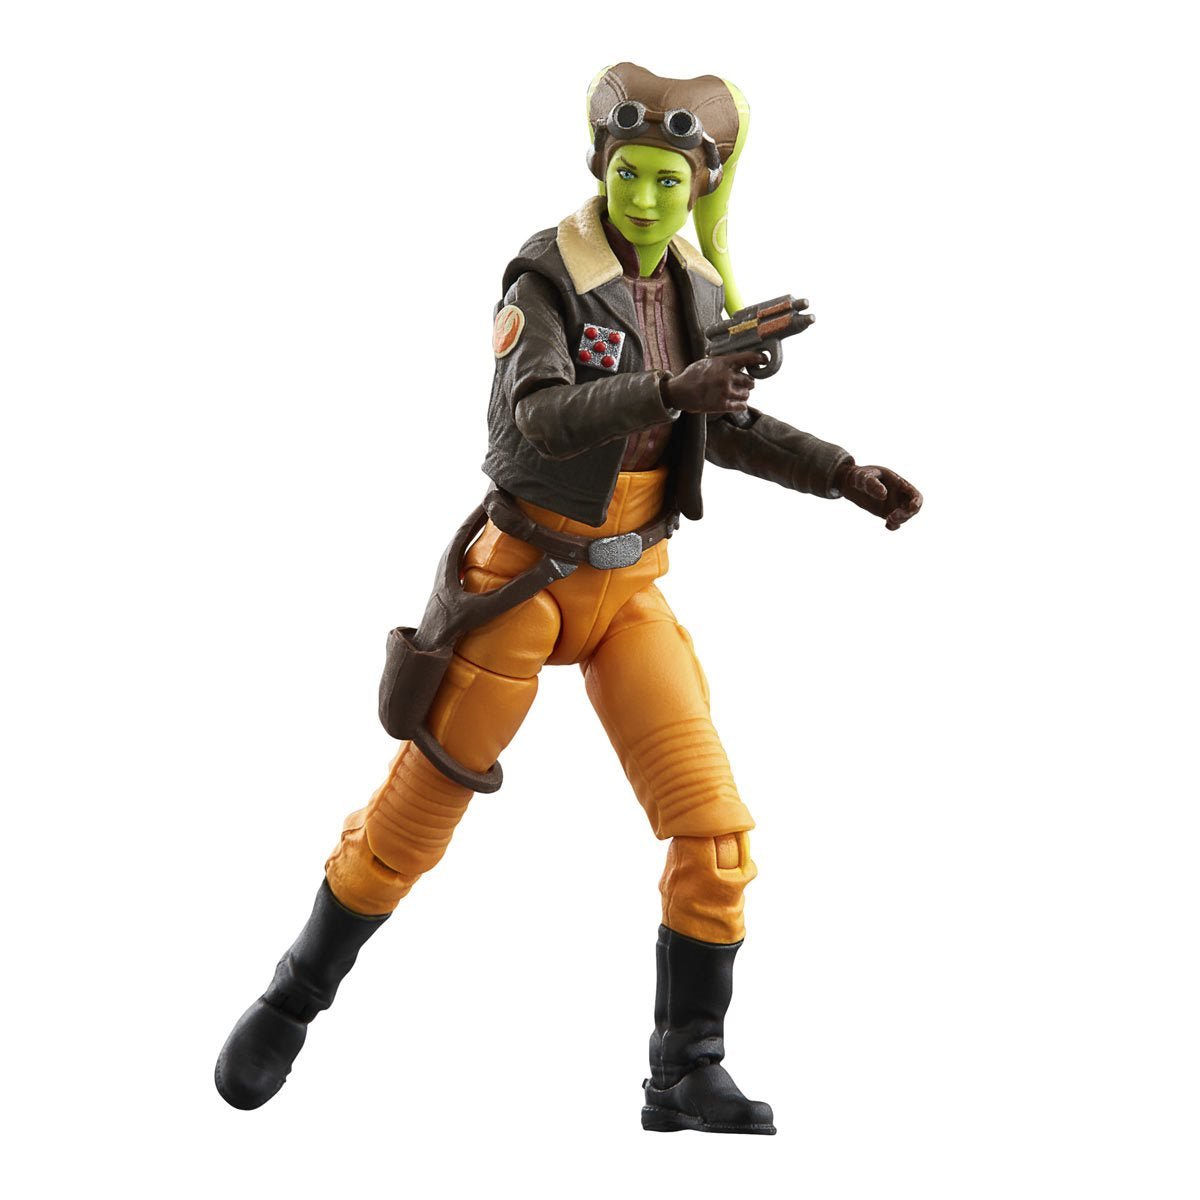 General Hera Syndulla Star Wars The Vintage Collection 3 3/4 in Action Figure Pop-O-Loco